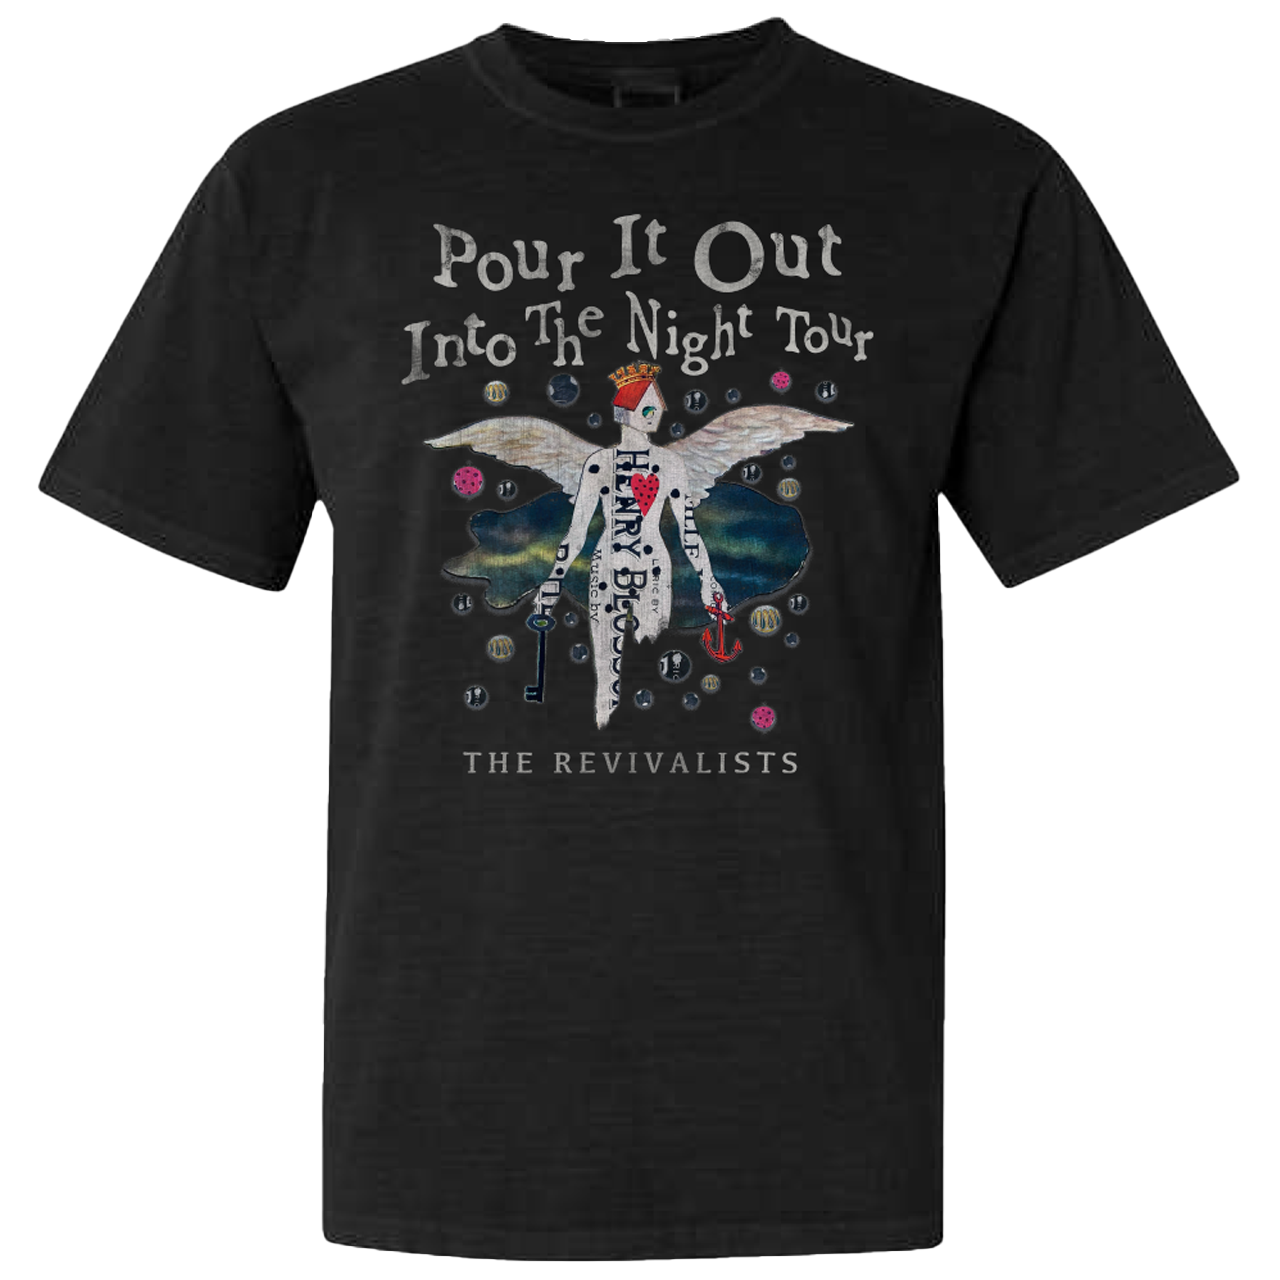 Pour It Out Into The Night Tour Tee